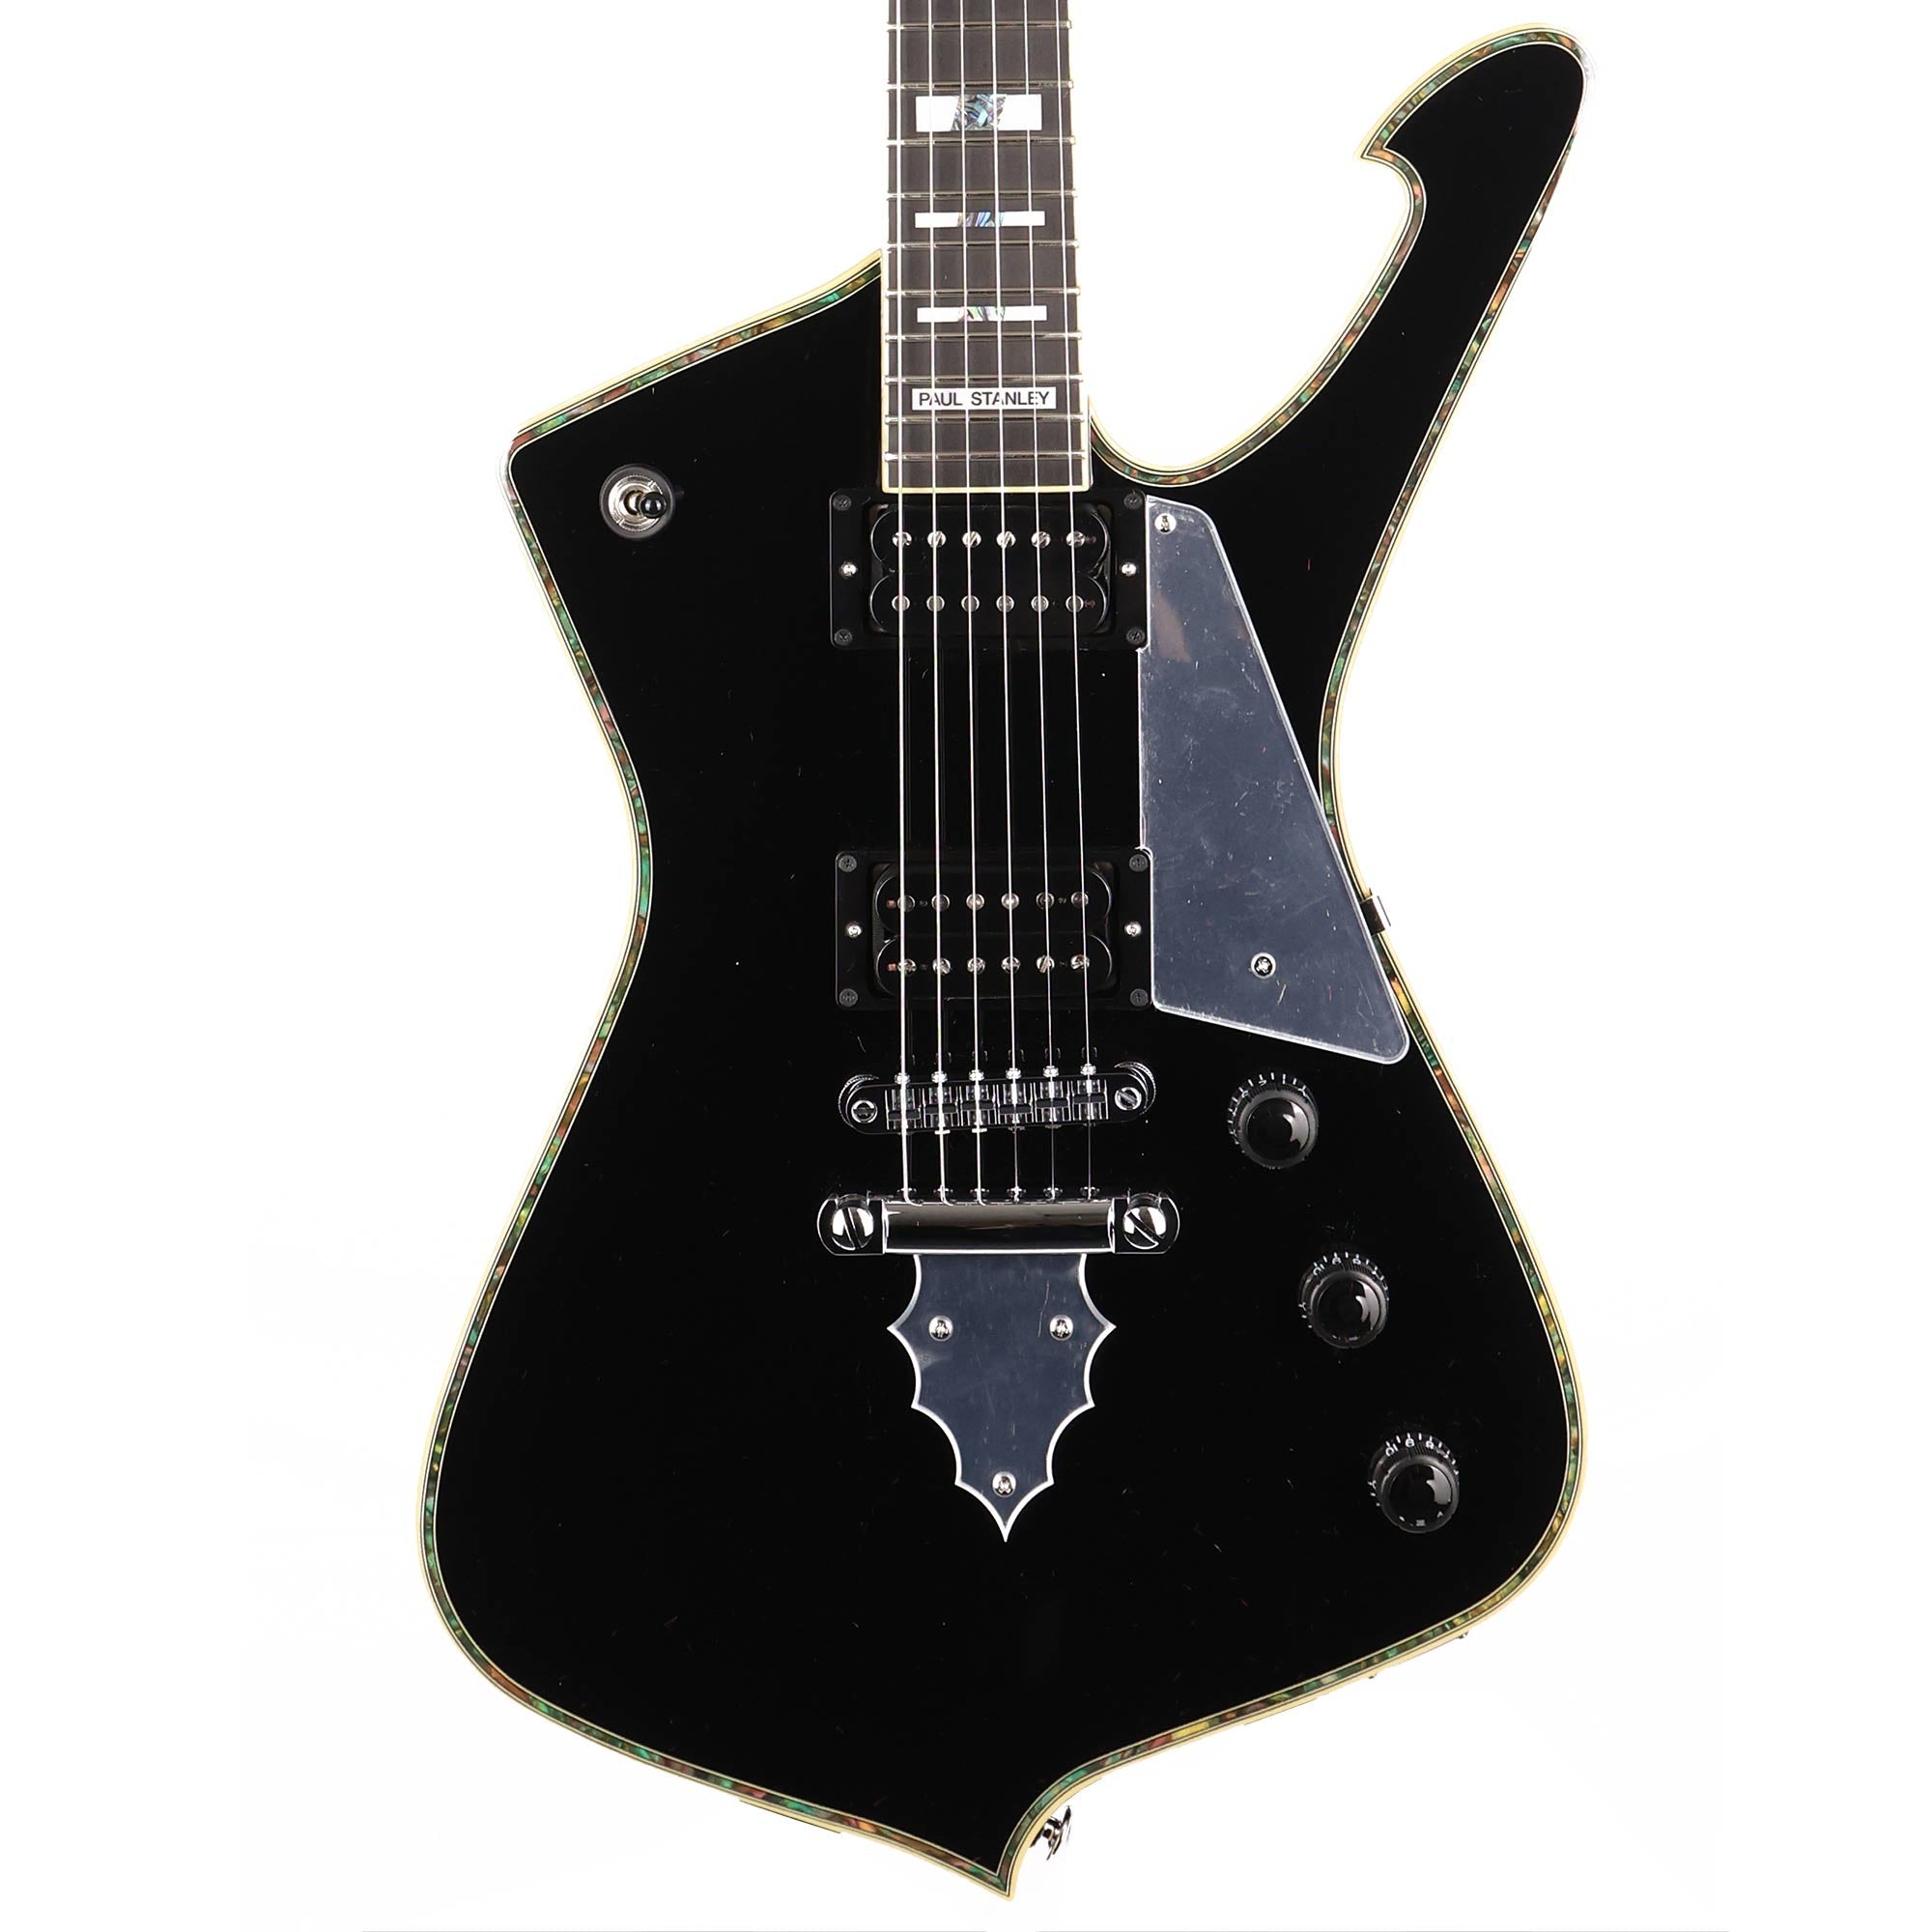 Ibanez Paul Stanley Signature PS10 Black | The Music Zoo